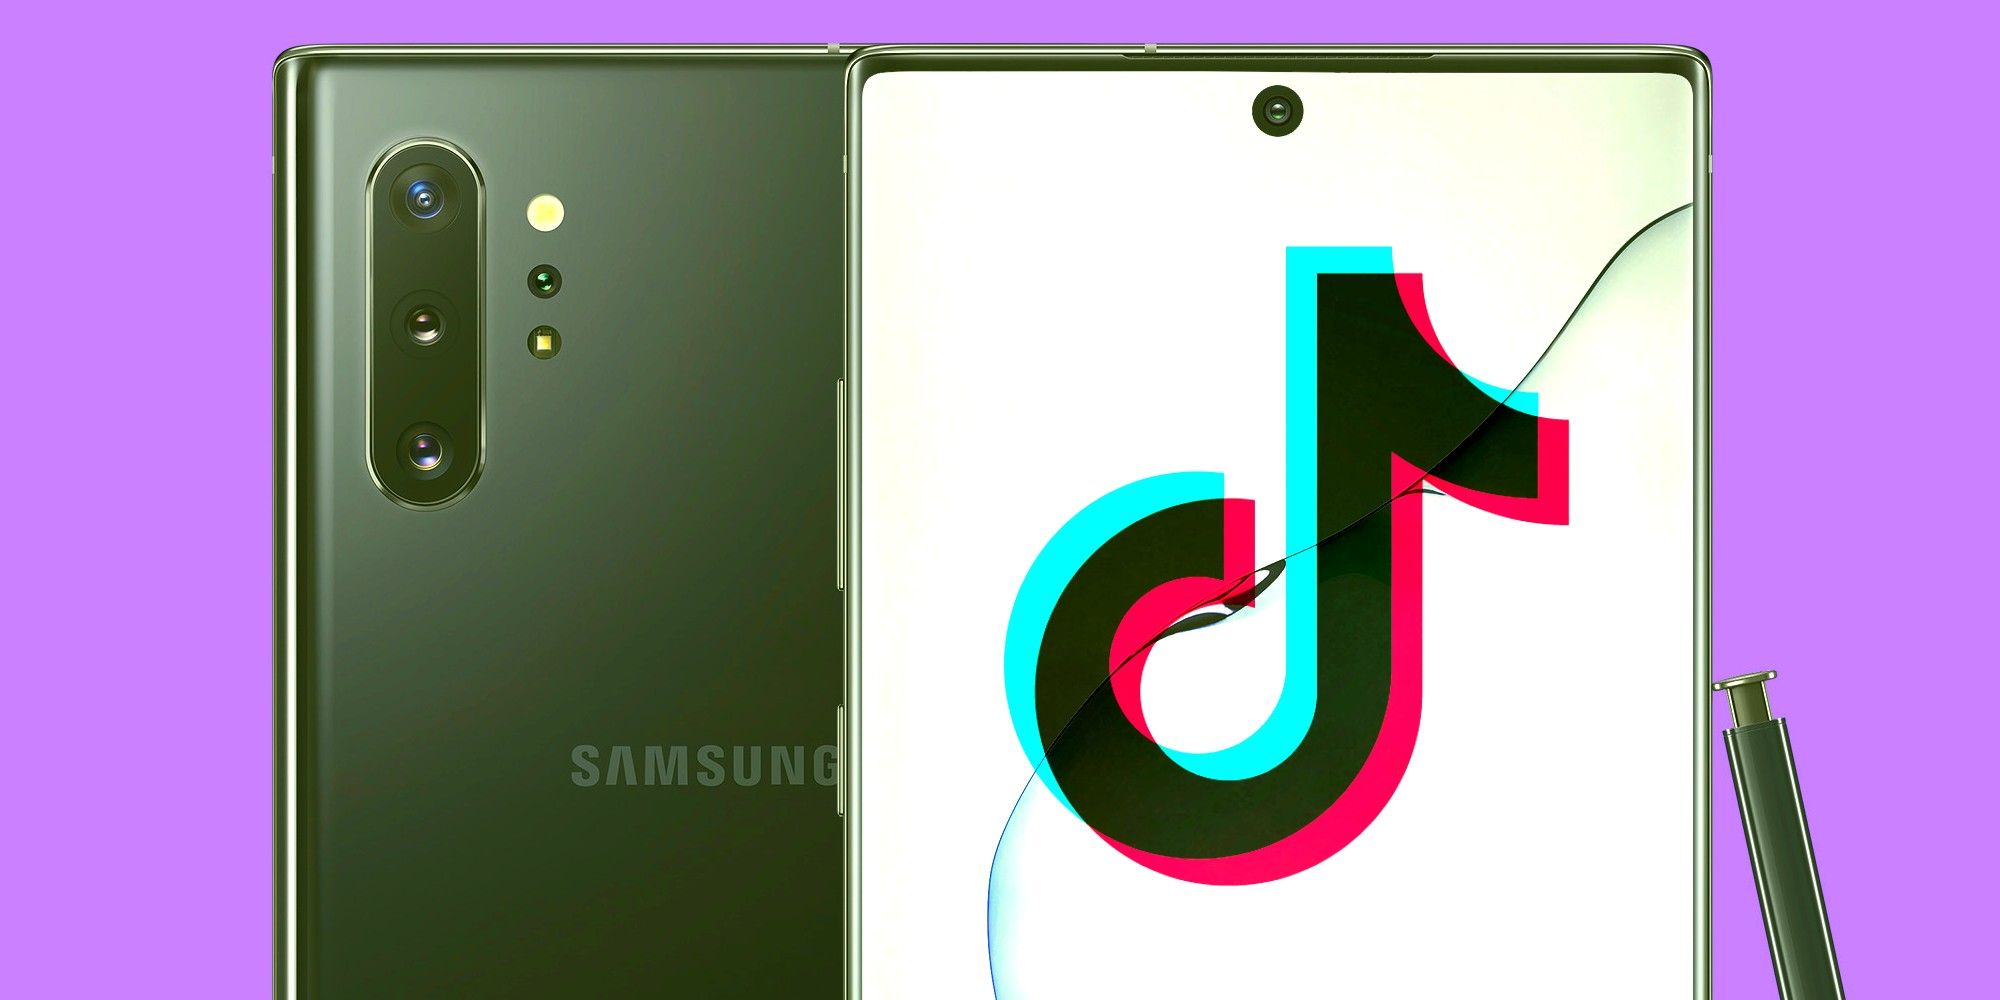 TikTok Is Reportedly An ‘Essential’ App For Some Samsung Installs